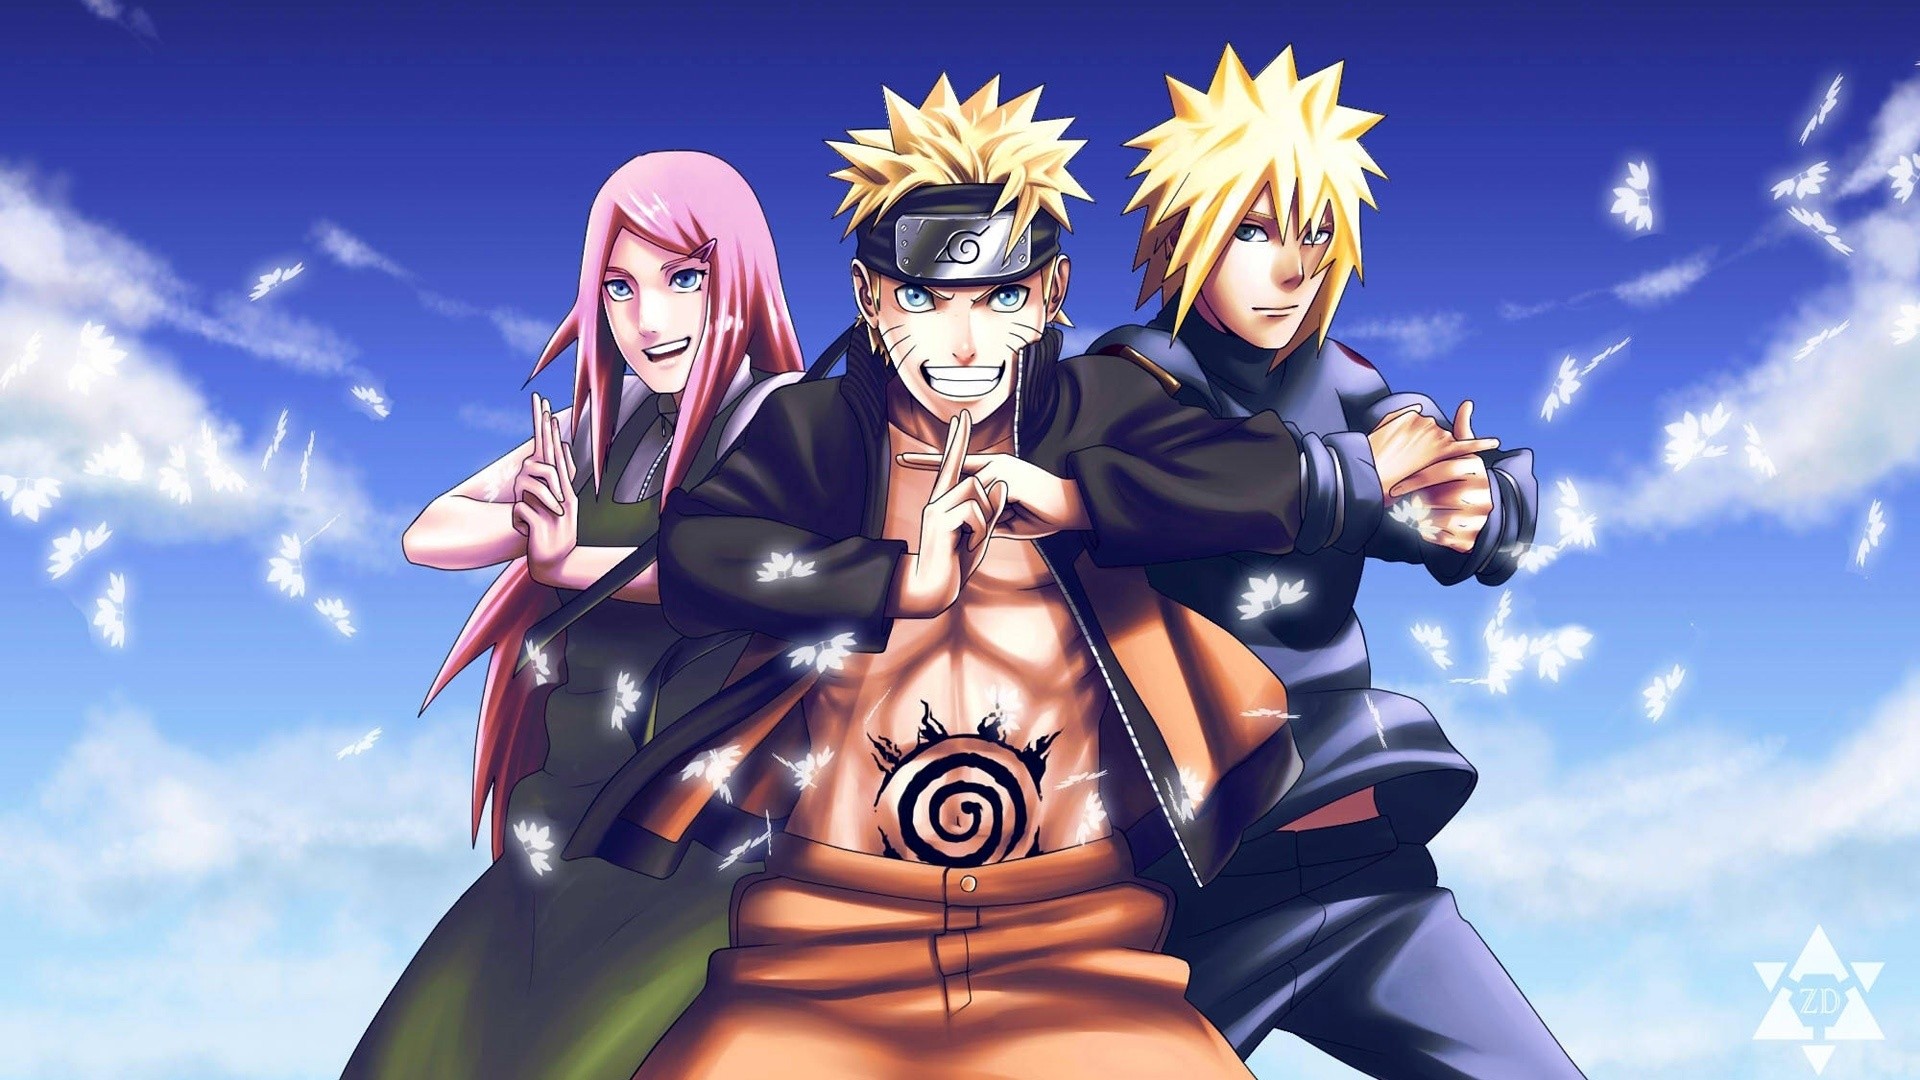 1920x1080 ... hd wallpaper japanese anime naruto | Background Wallpapers for.